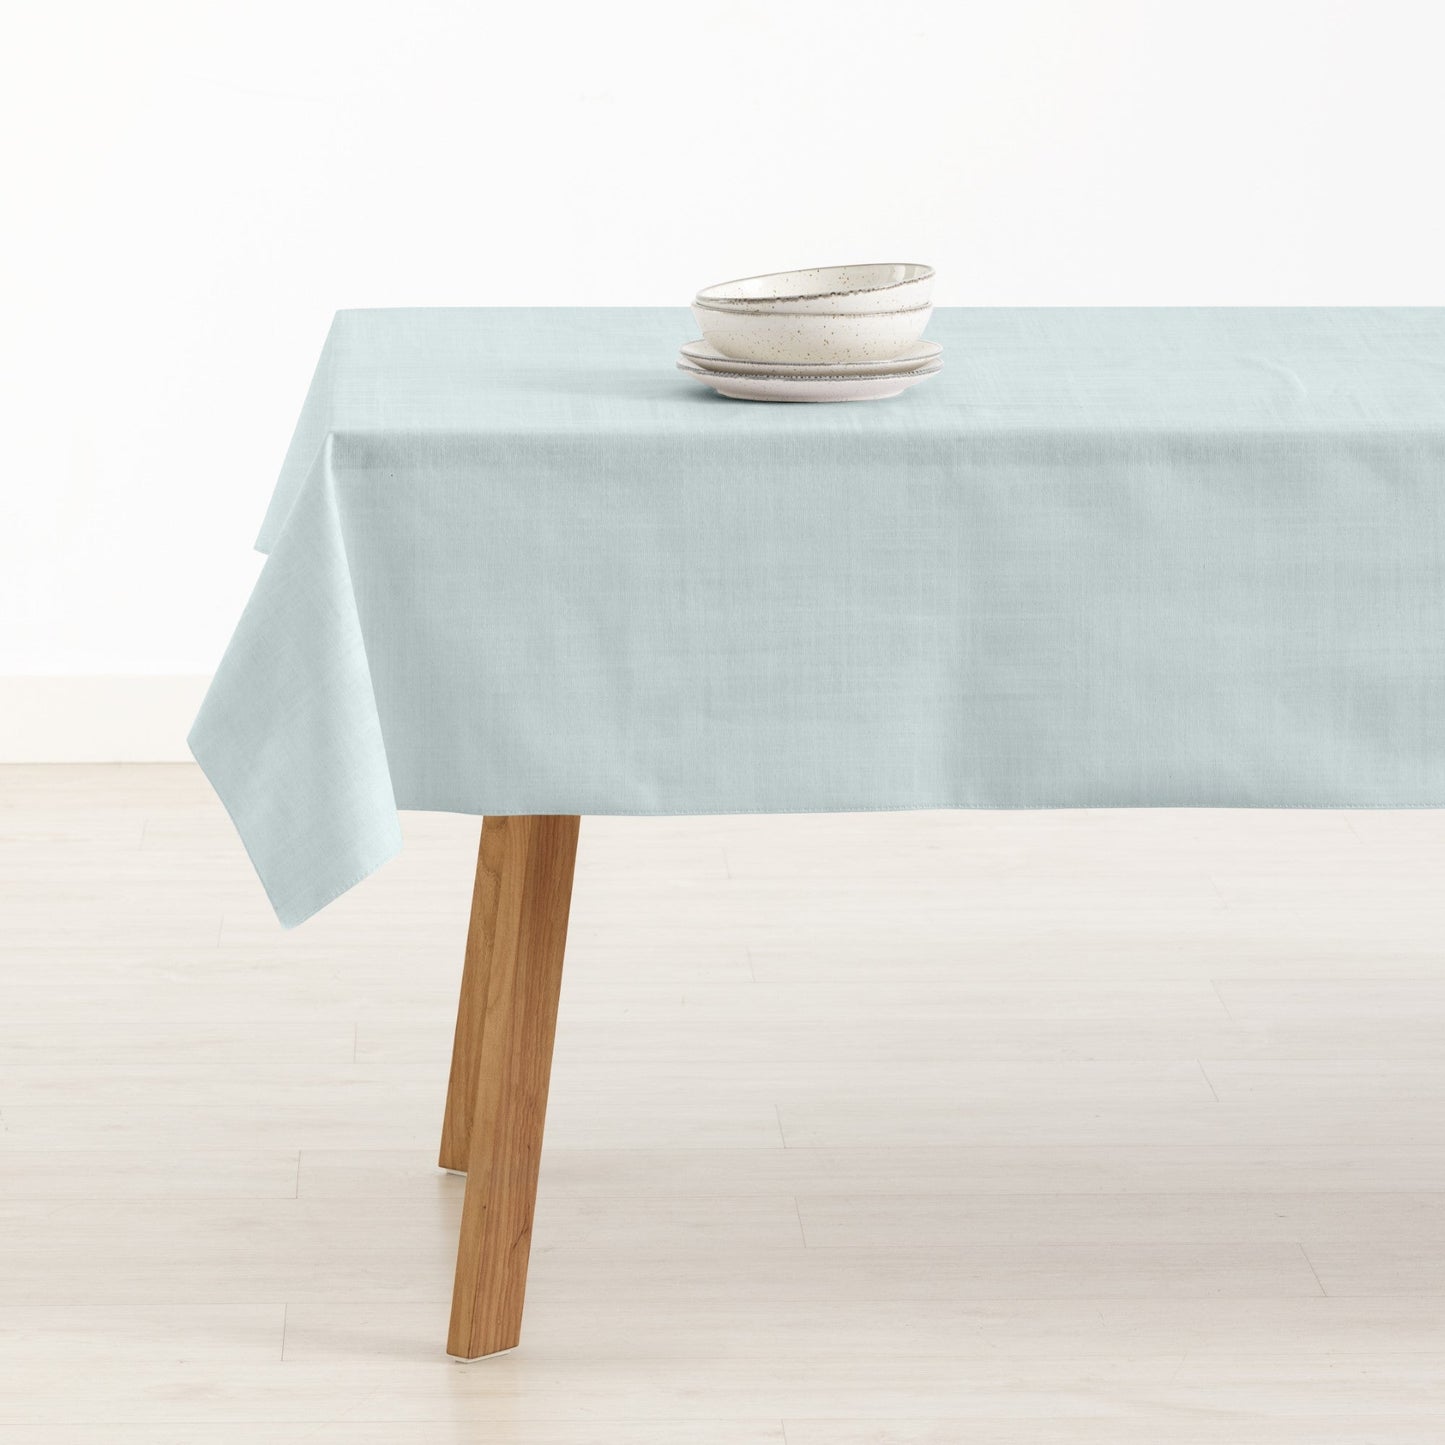 Stain-resistant tablecloth 0120-310